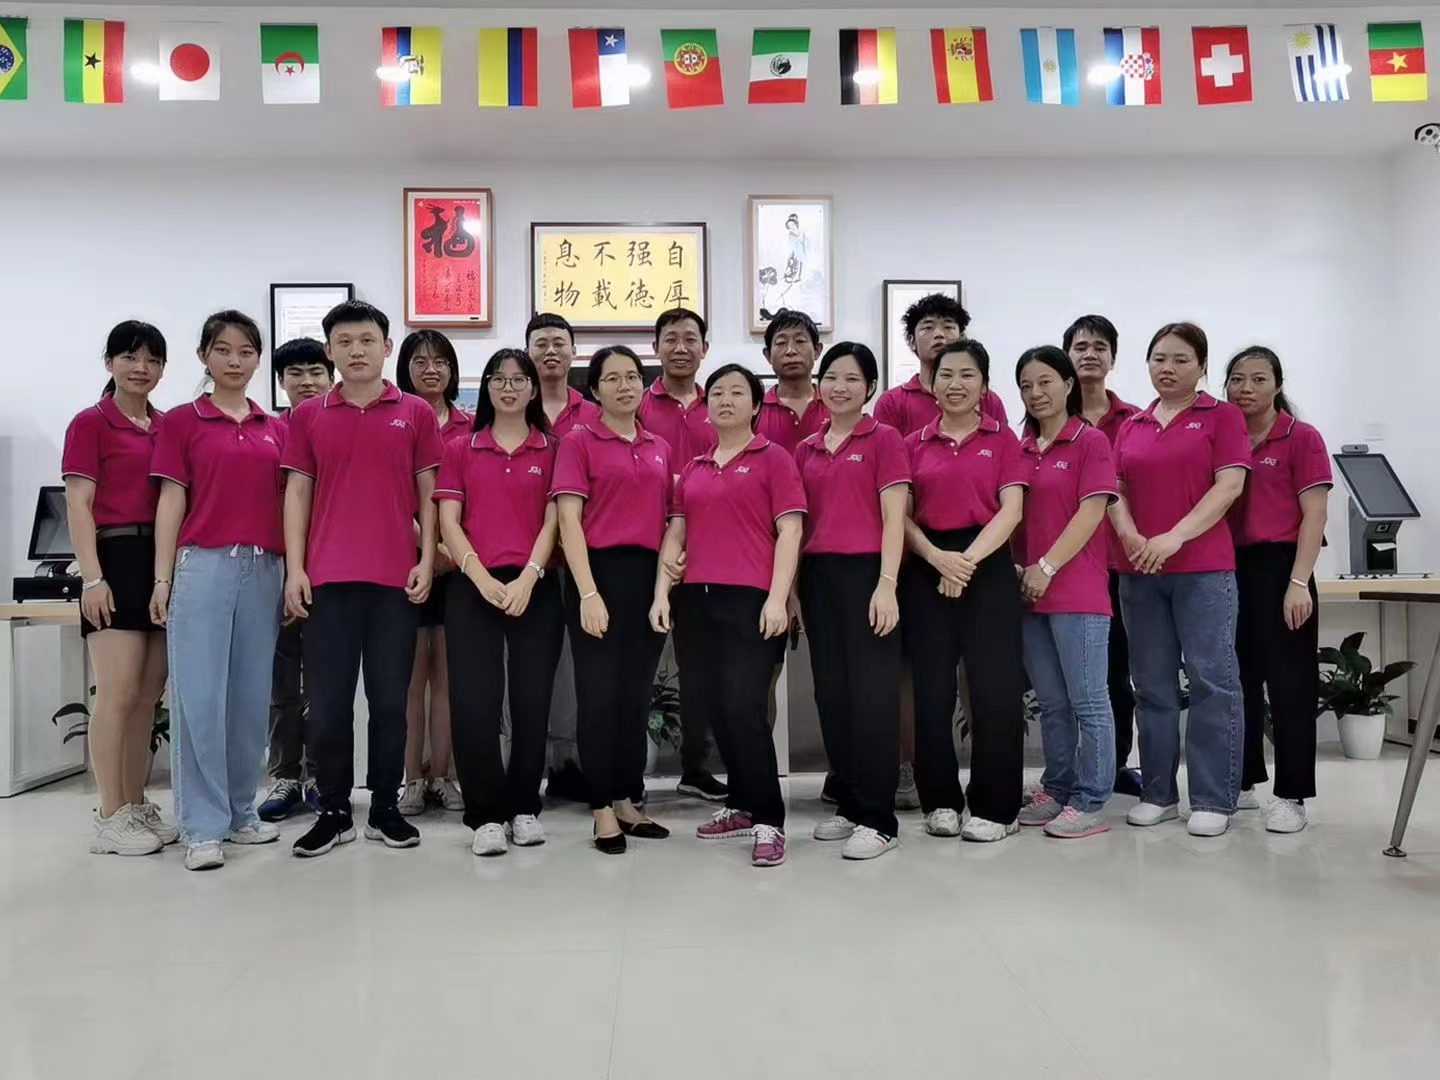 Shenzhen Sui Yi Touch Computer Co., Ltd. holds employees table tennis match